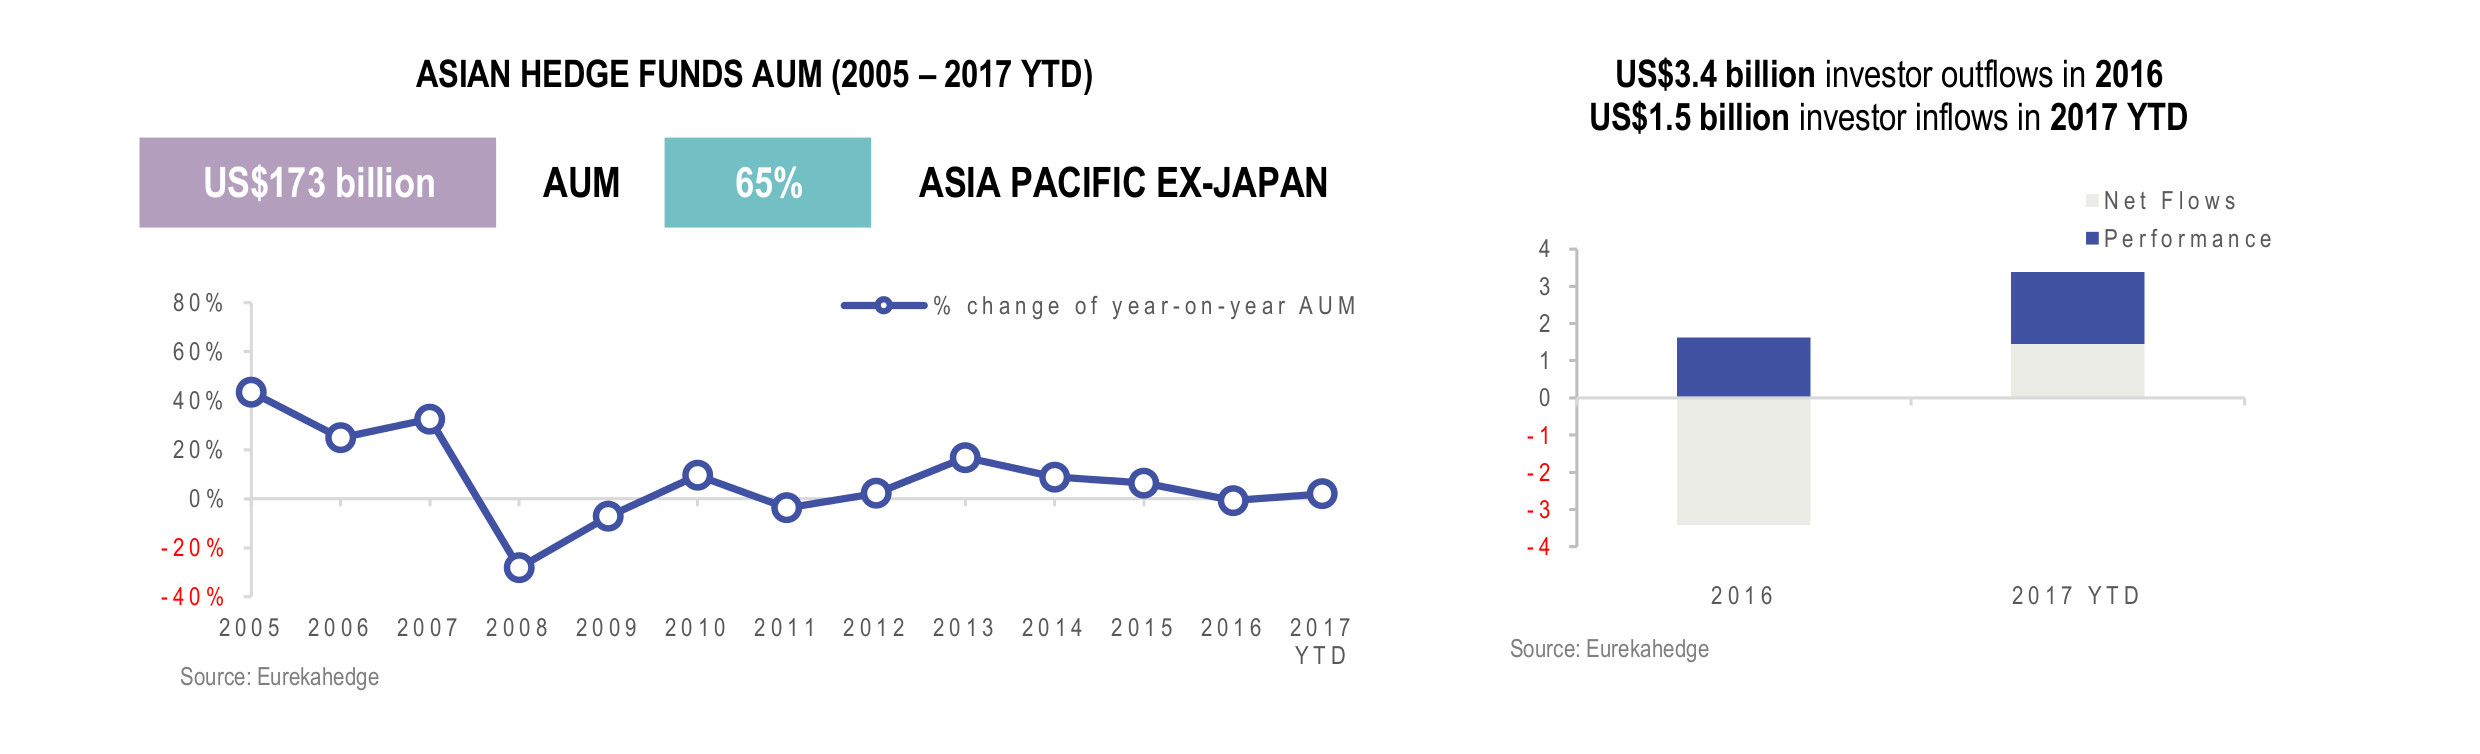 Asian Hedge Fund Infographic April 2017- AUM and Asia Pacific Ex-Japan